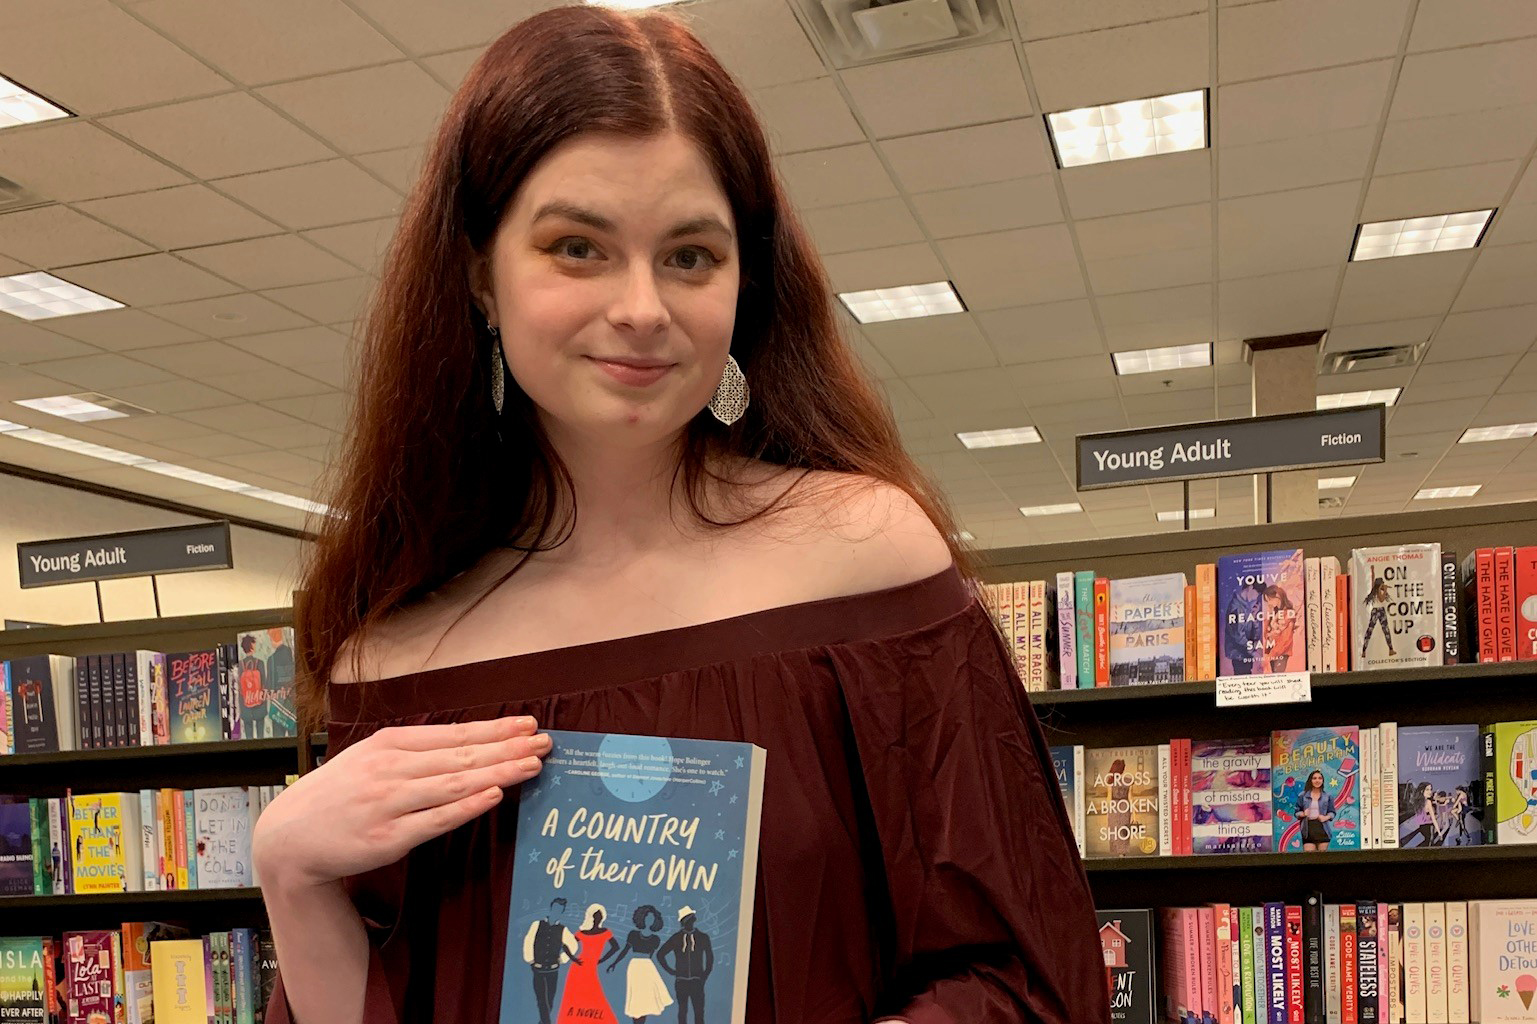 Girl poses with book she wrote